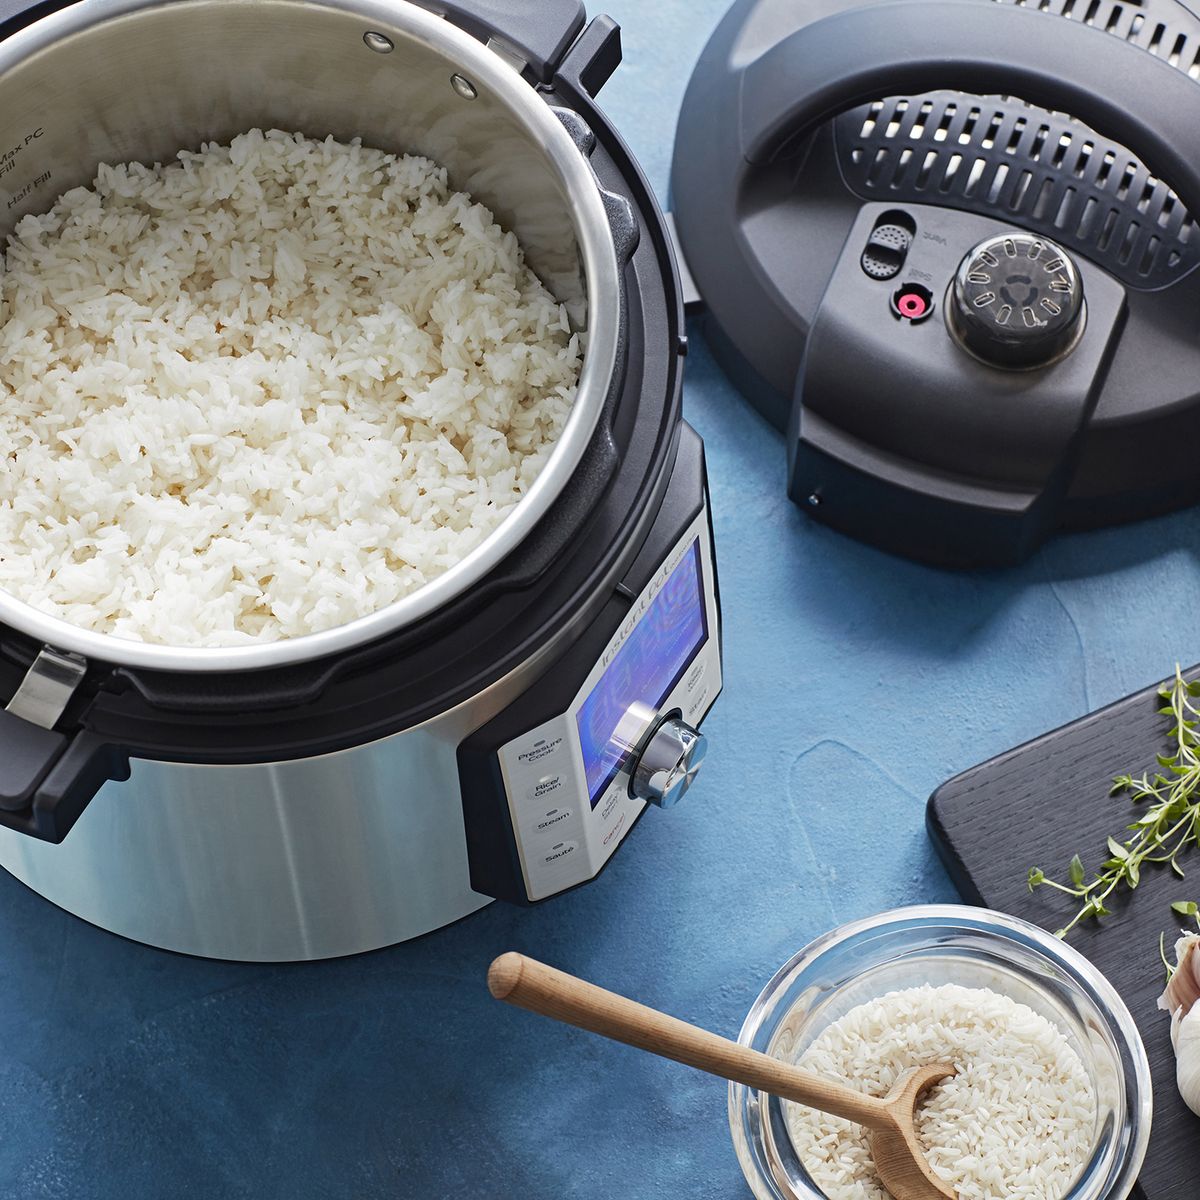 Instant Pot Duo Evo Plus Review: Why the Evo Is Best for 2021